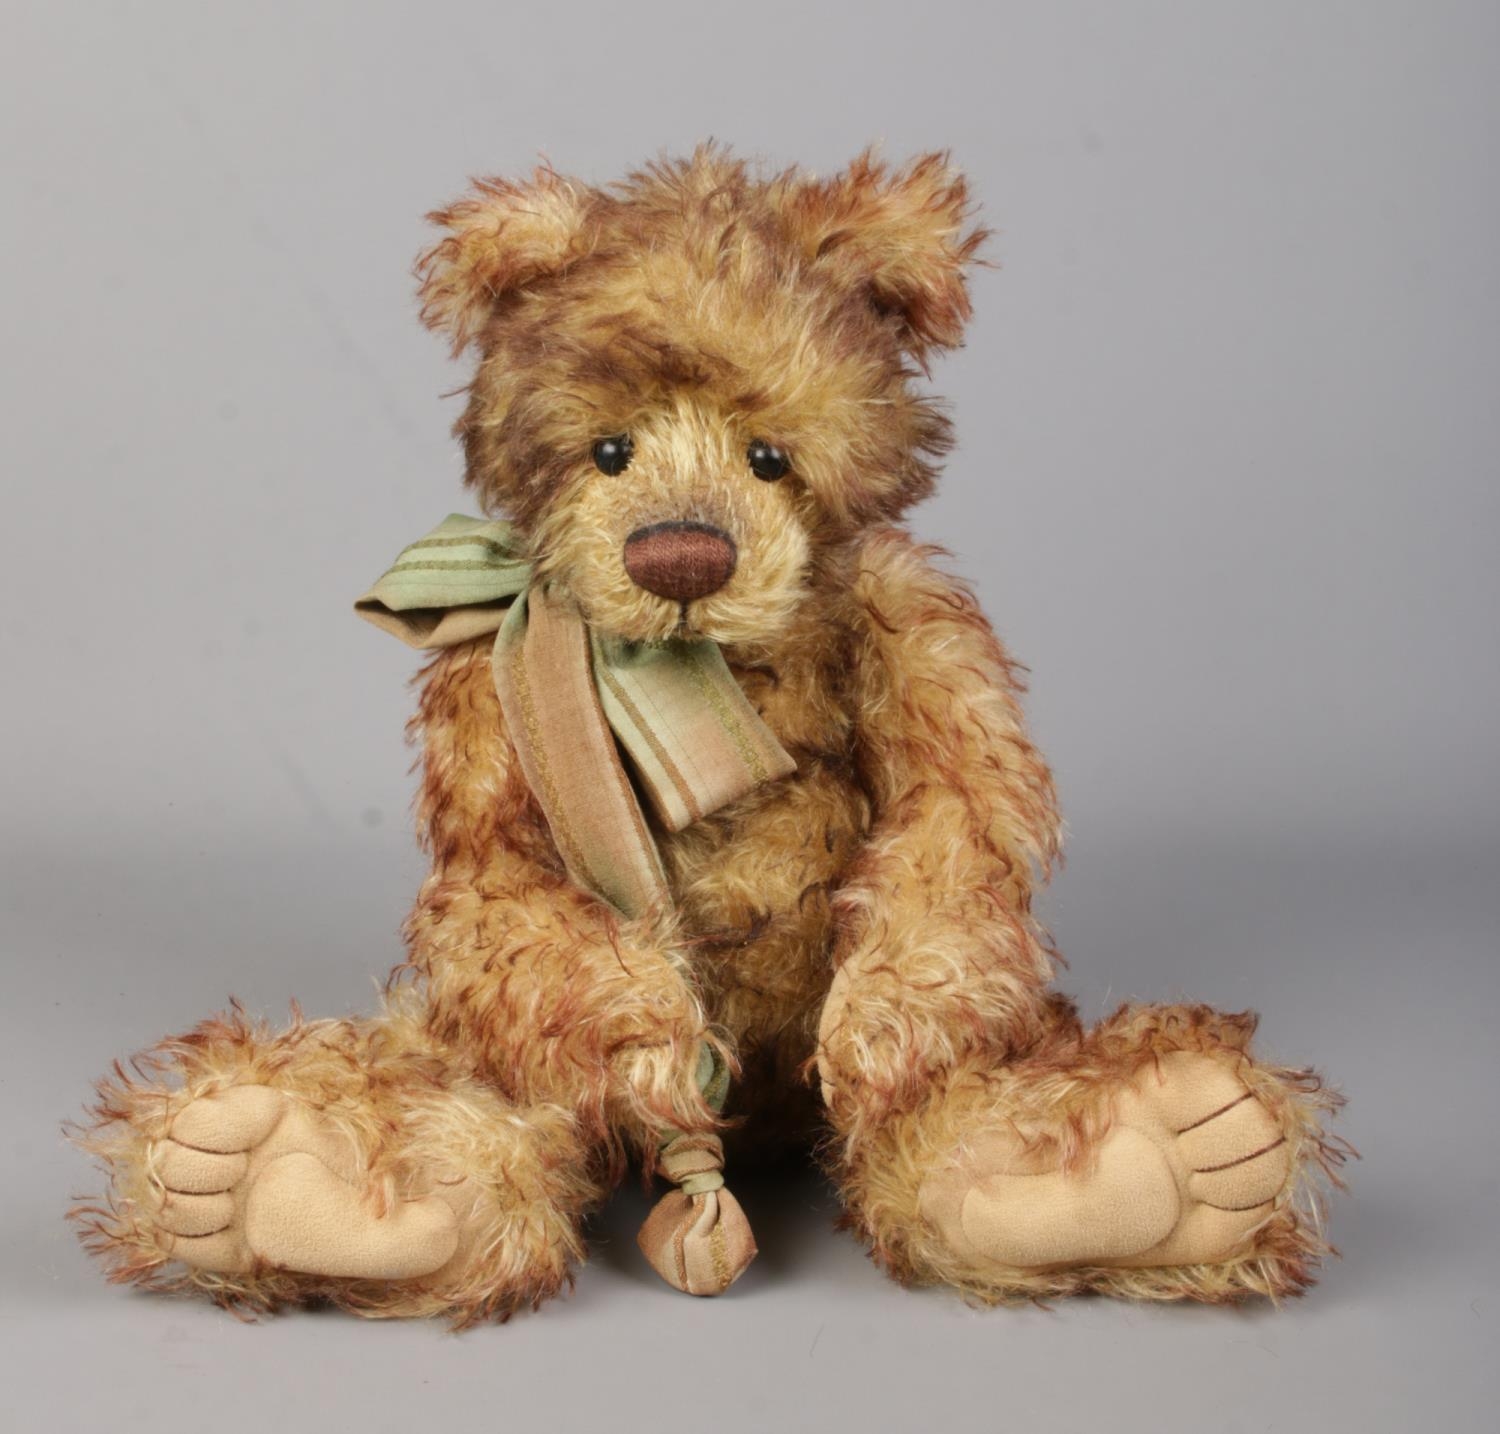 A Charlie Bears Isabelle Collection limited edition bear; Curtis. Number 239 of 300.